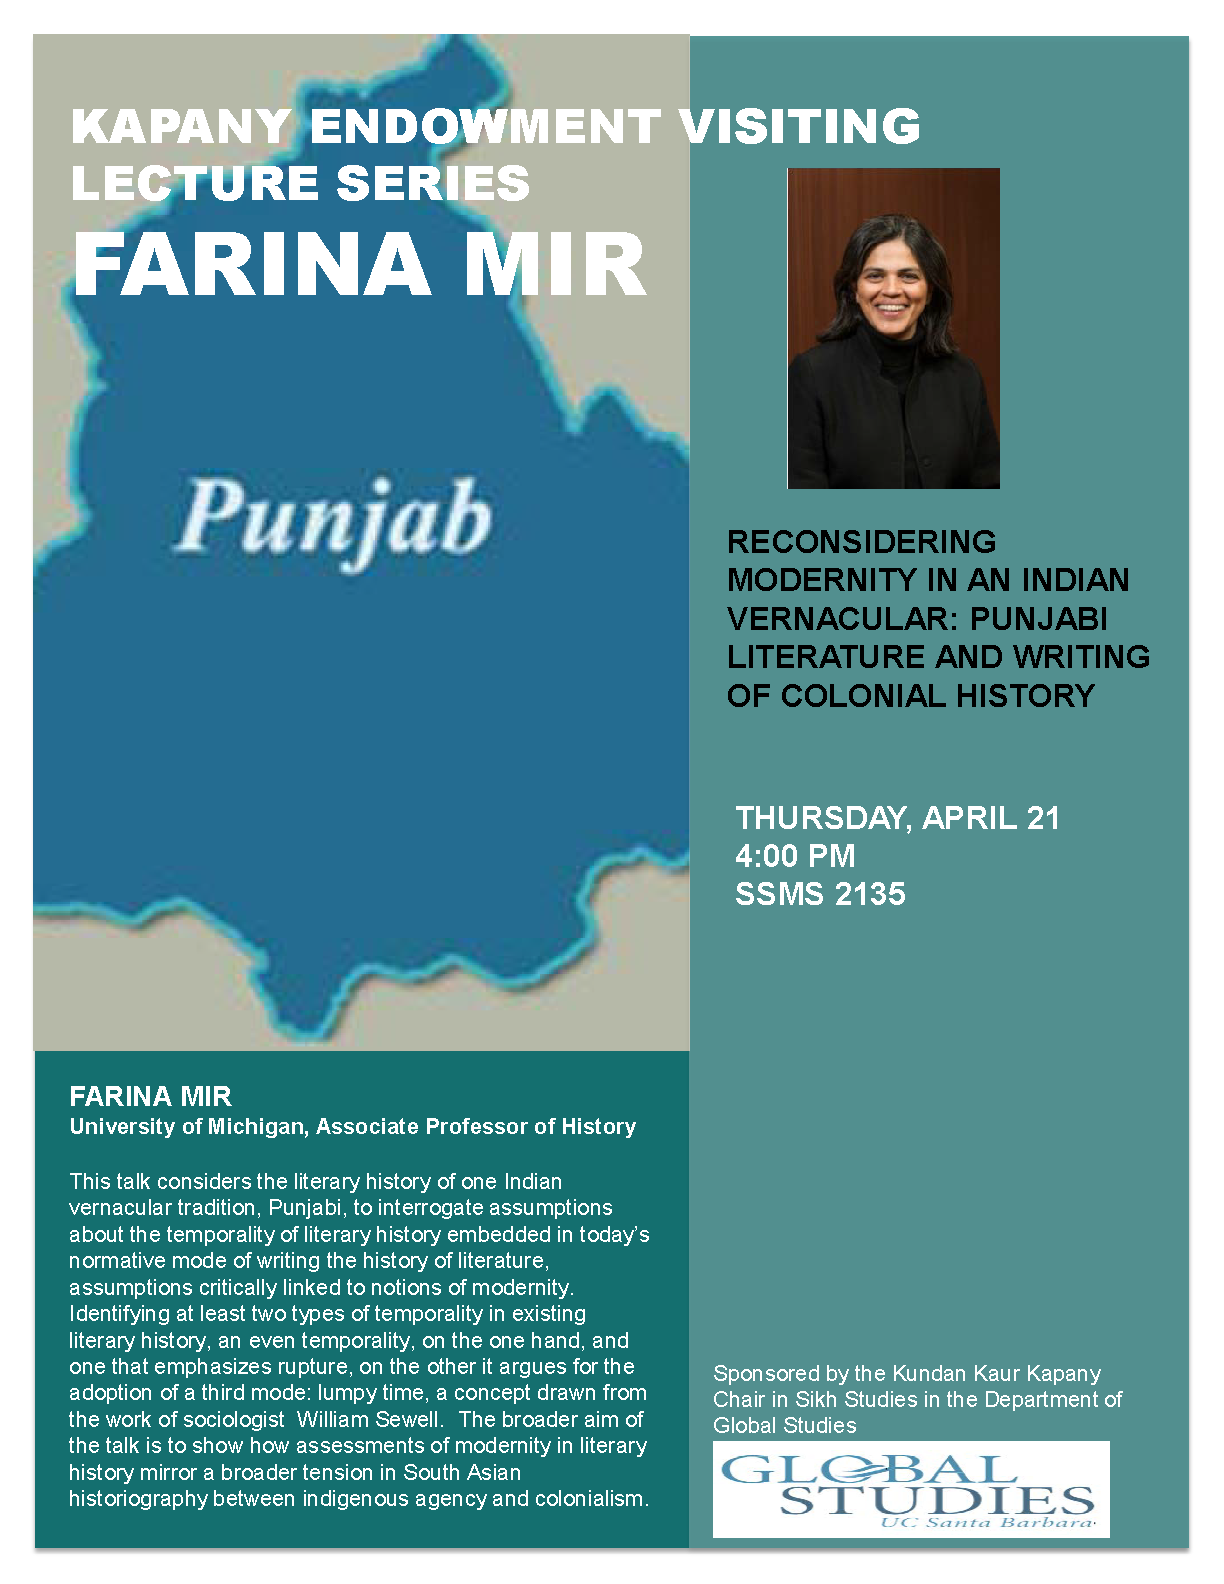 flyer for Farina Mir: "Reconsidering Modernity in an Indian Vernacular: Punjabi Literature and the Writing of Colonial History"